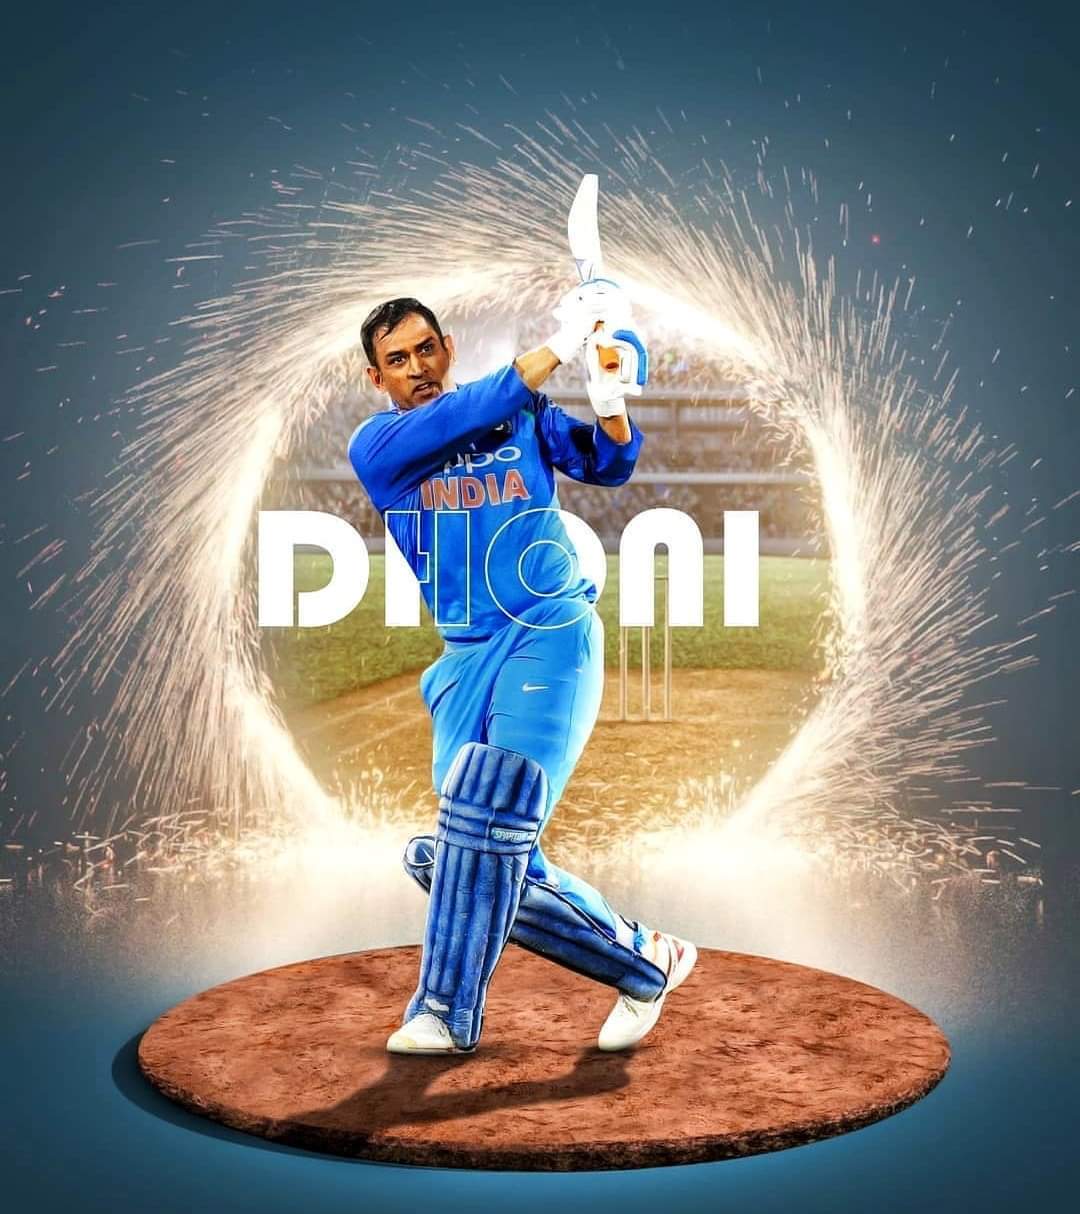 Happy birthday Mahendra Singh Dhoni sir.
only captain in the history of Cricket to win all ICC trophies. 